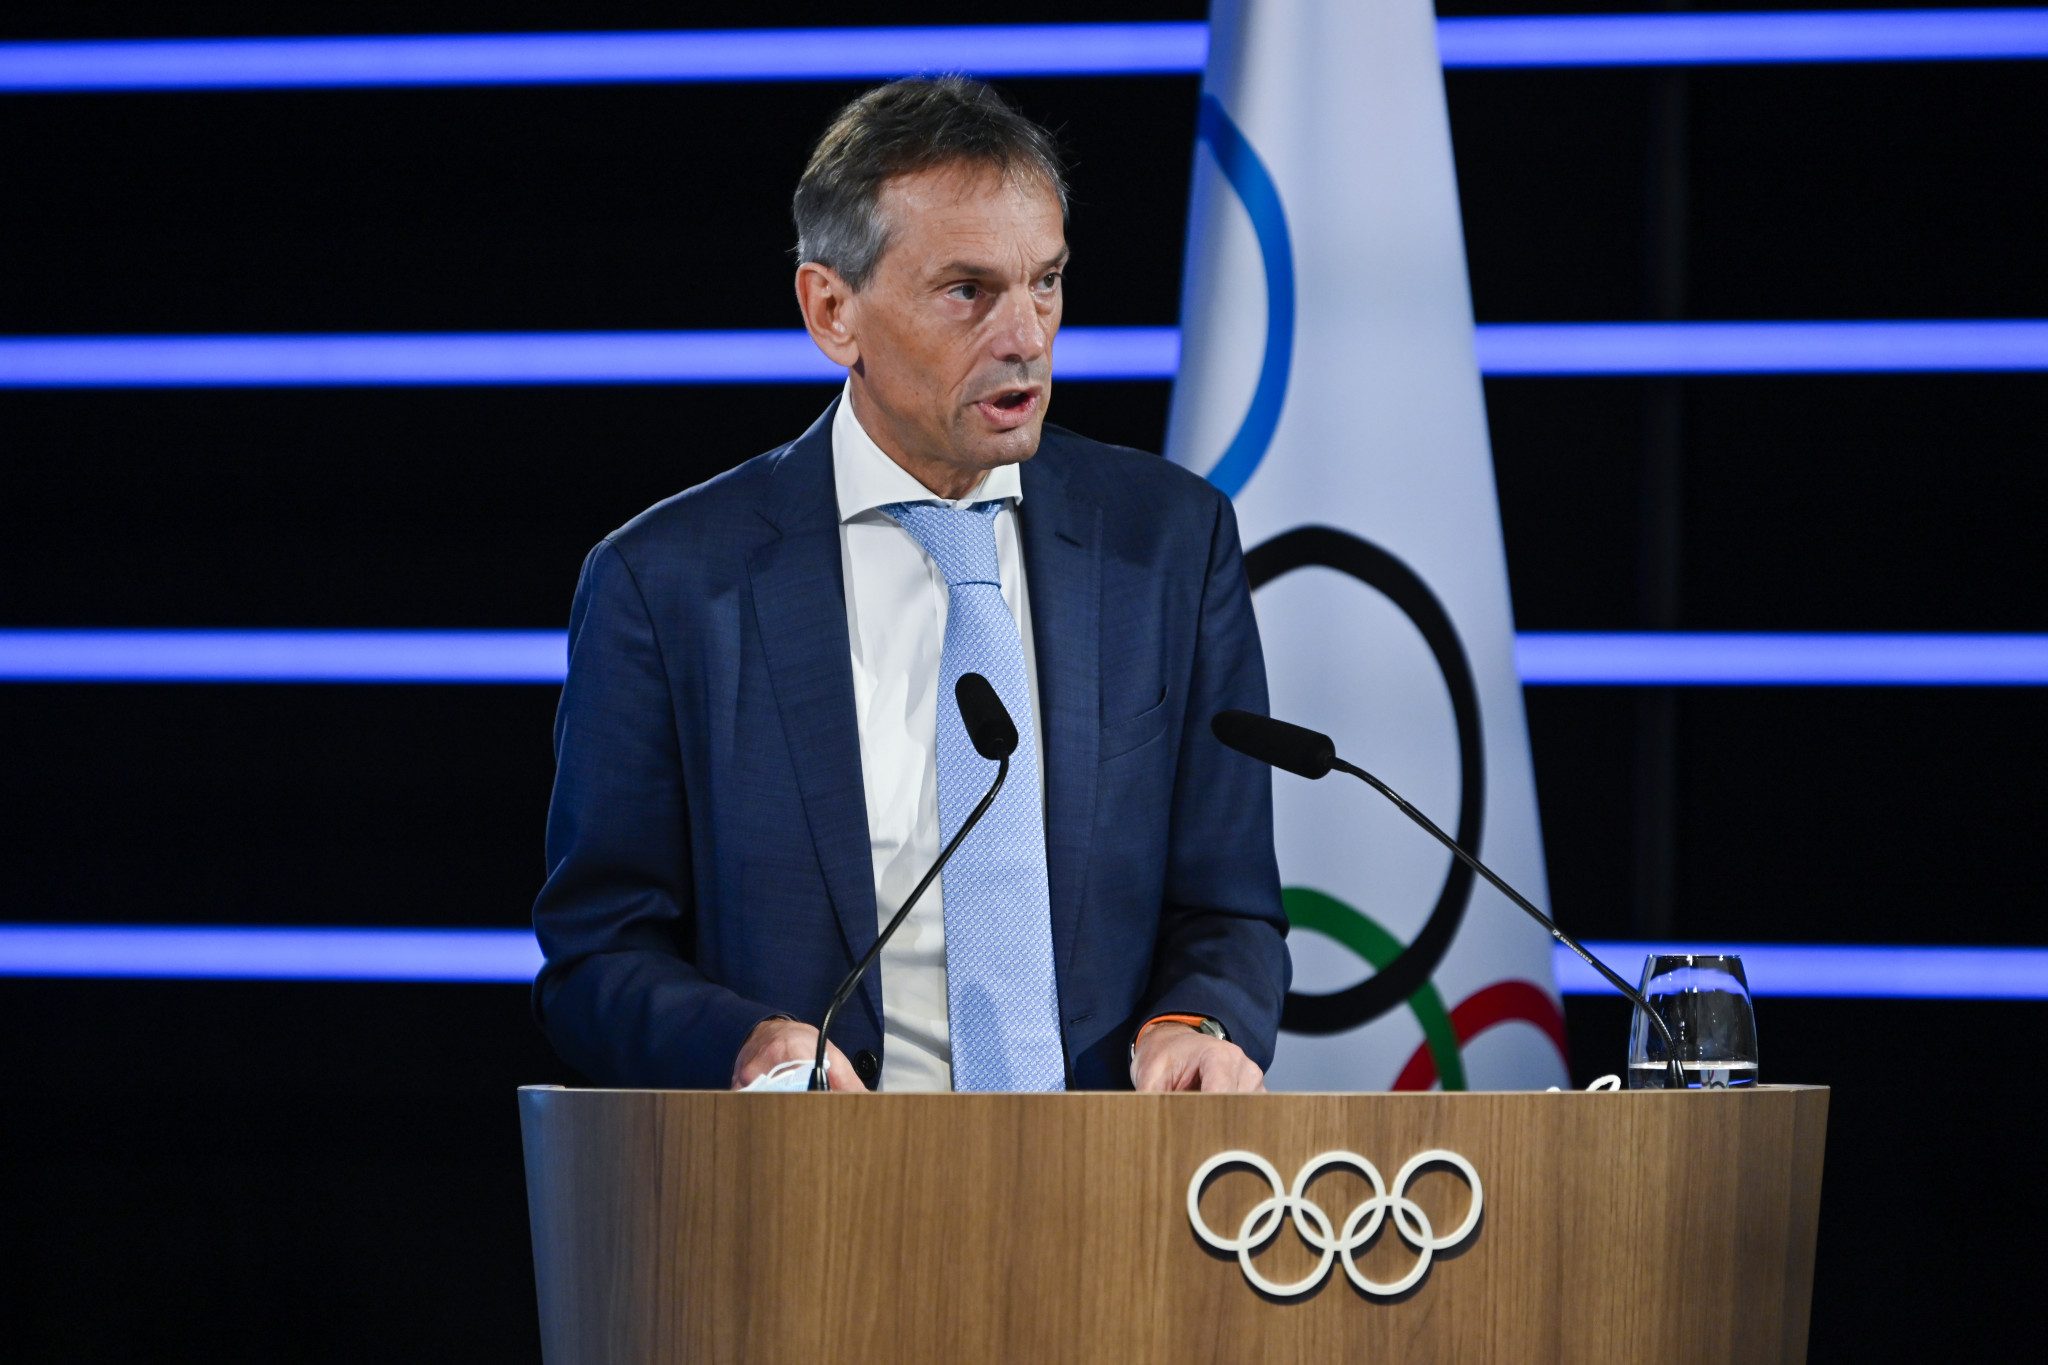 IOC aiming to name 2030 Winter Olympics host at next year's Session in Mumbai